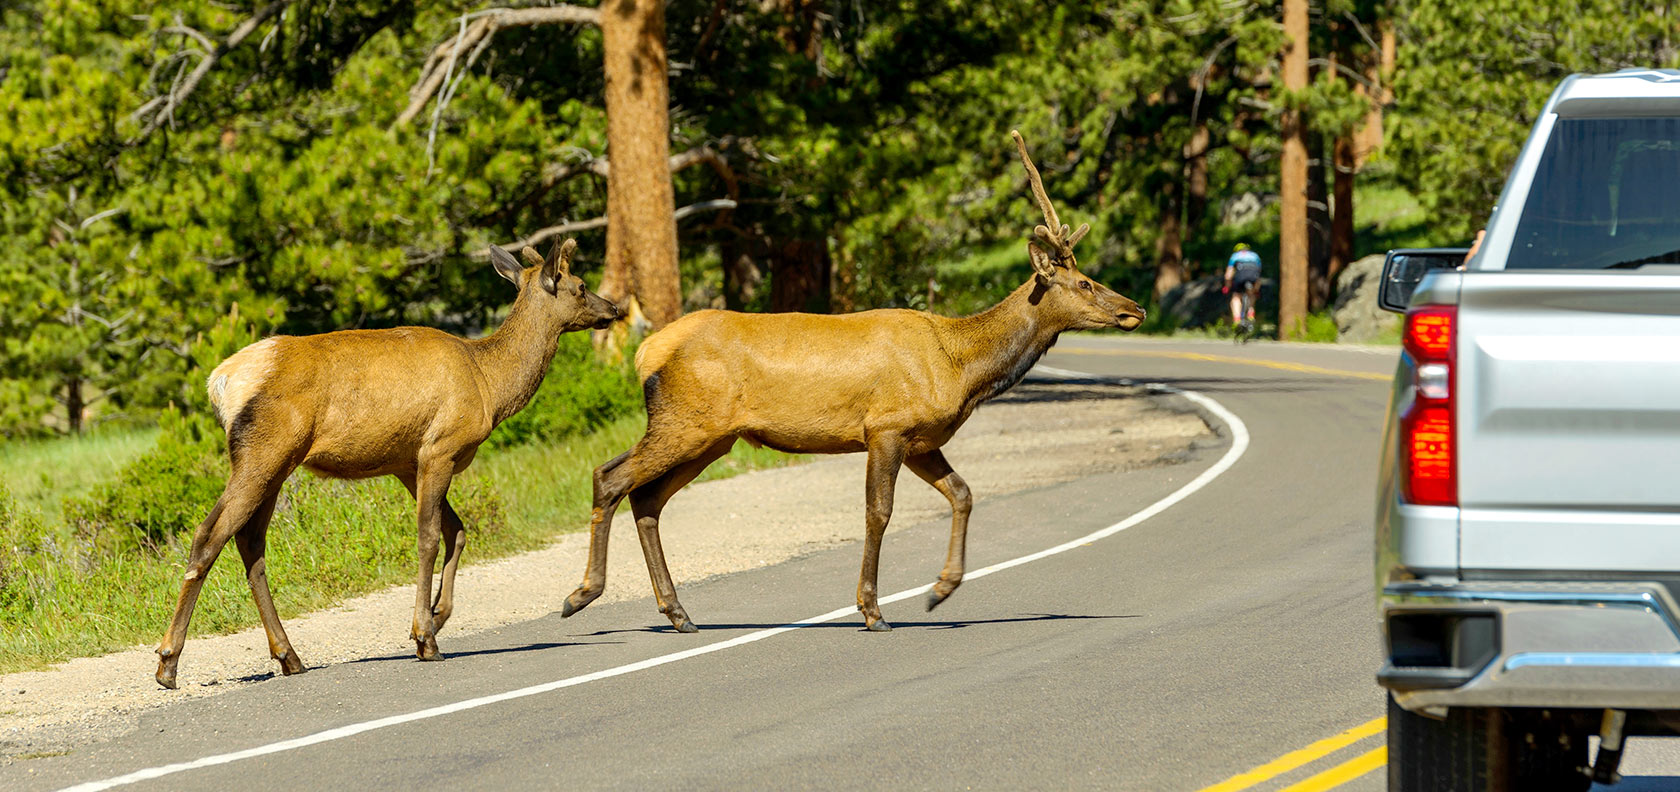 Deer crossing the road creating a risk of collision with a car.